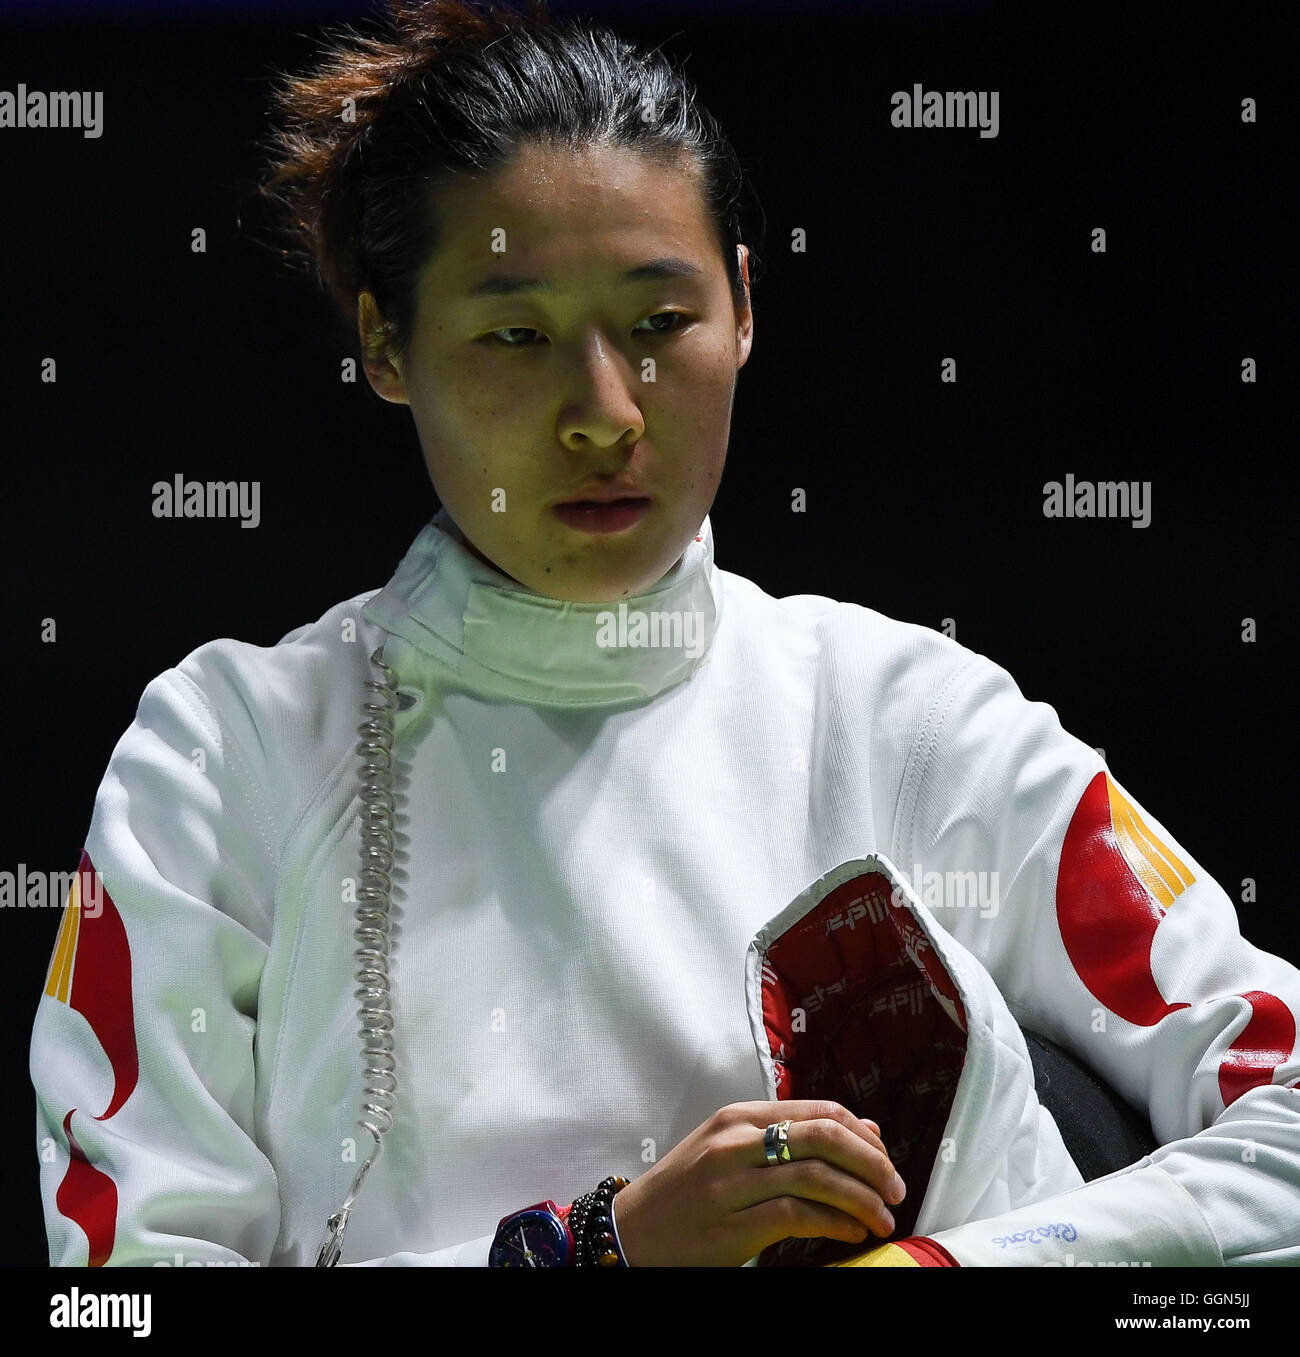 Rio De Janeiro, Brazil. 6th Aug, 2016. Sun Yujie of China participates in the competition of Women's Epee indiviual Table 32 in Rio de Janeiro, Brazil, on Aug. 6, 2016. Sun Yujie lost to Kang Young Mi of KOR with 10:15. Credit:  Liu Dawei/Xinhua/Alamy Live News Stock Photo